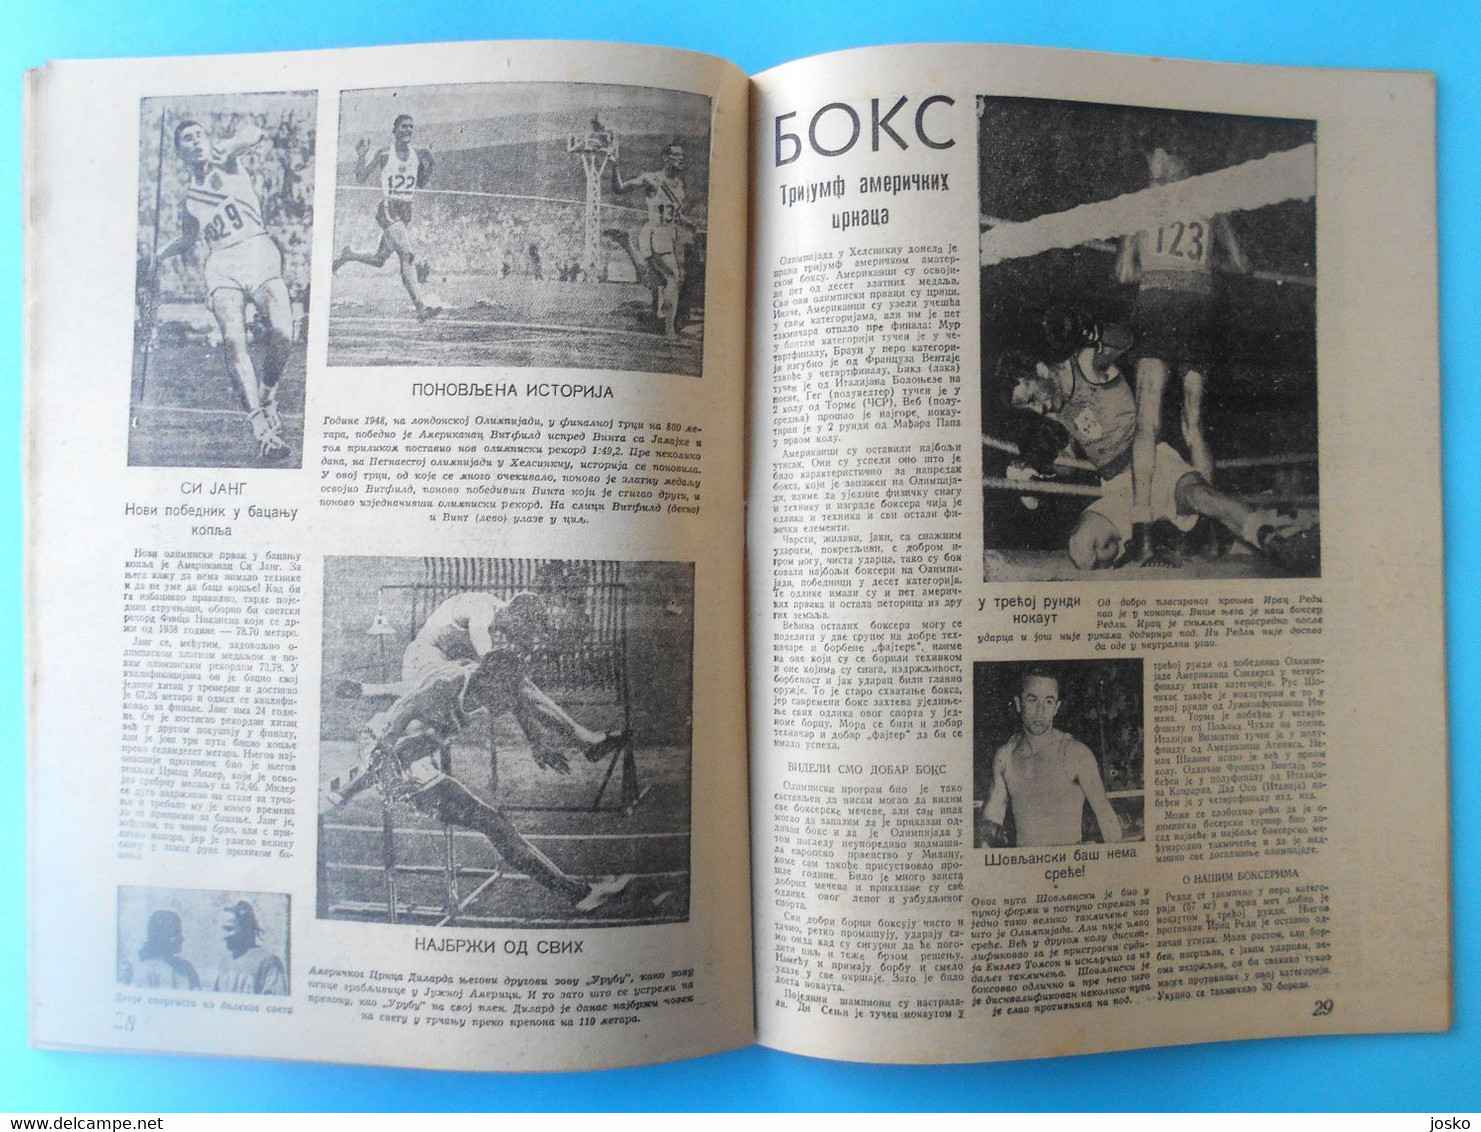 XV SUMMER OLYMPIC GAMES HELSINKI 1952 - Yugoslavian vintage guide-programme * Olympia Olympiade Jeux Olympiques Finland